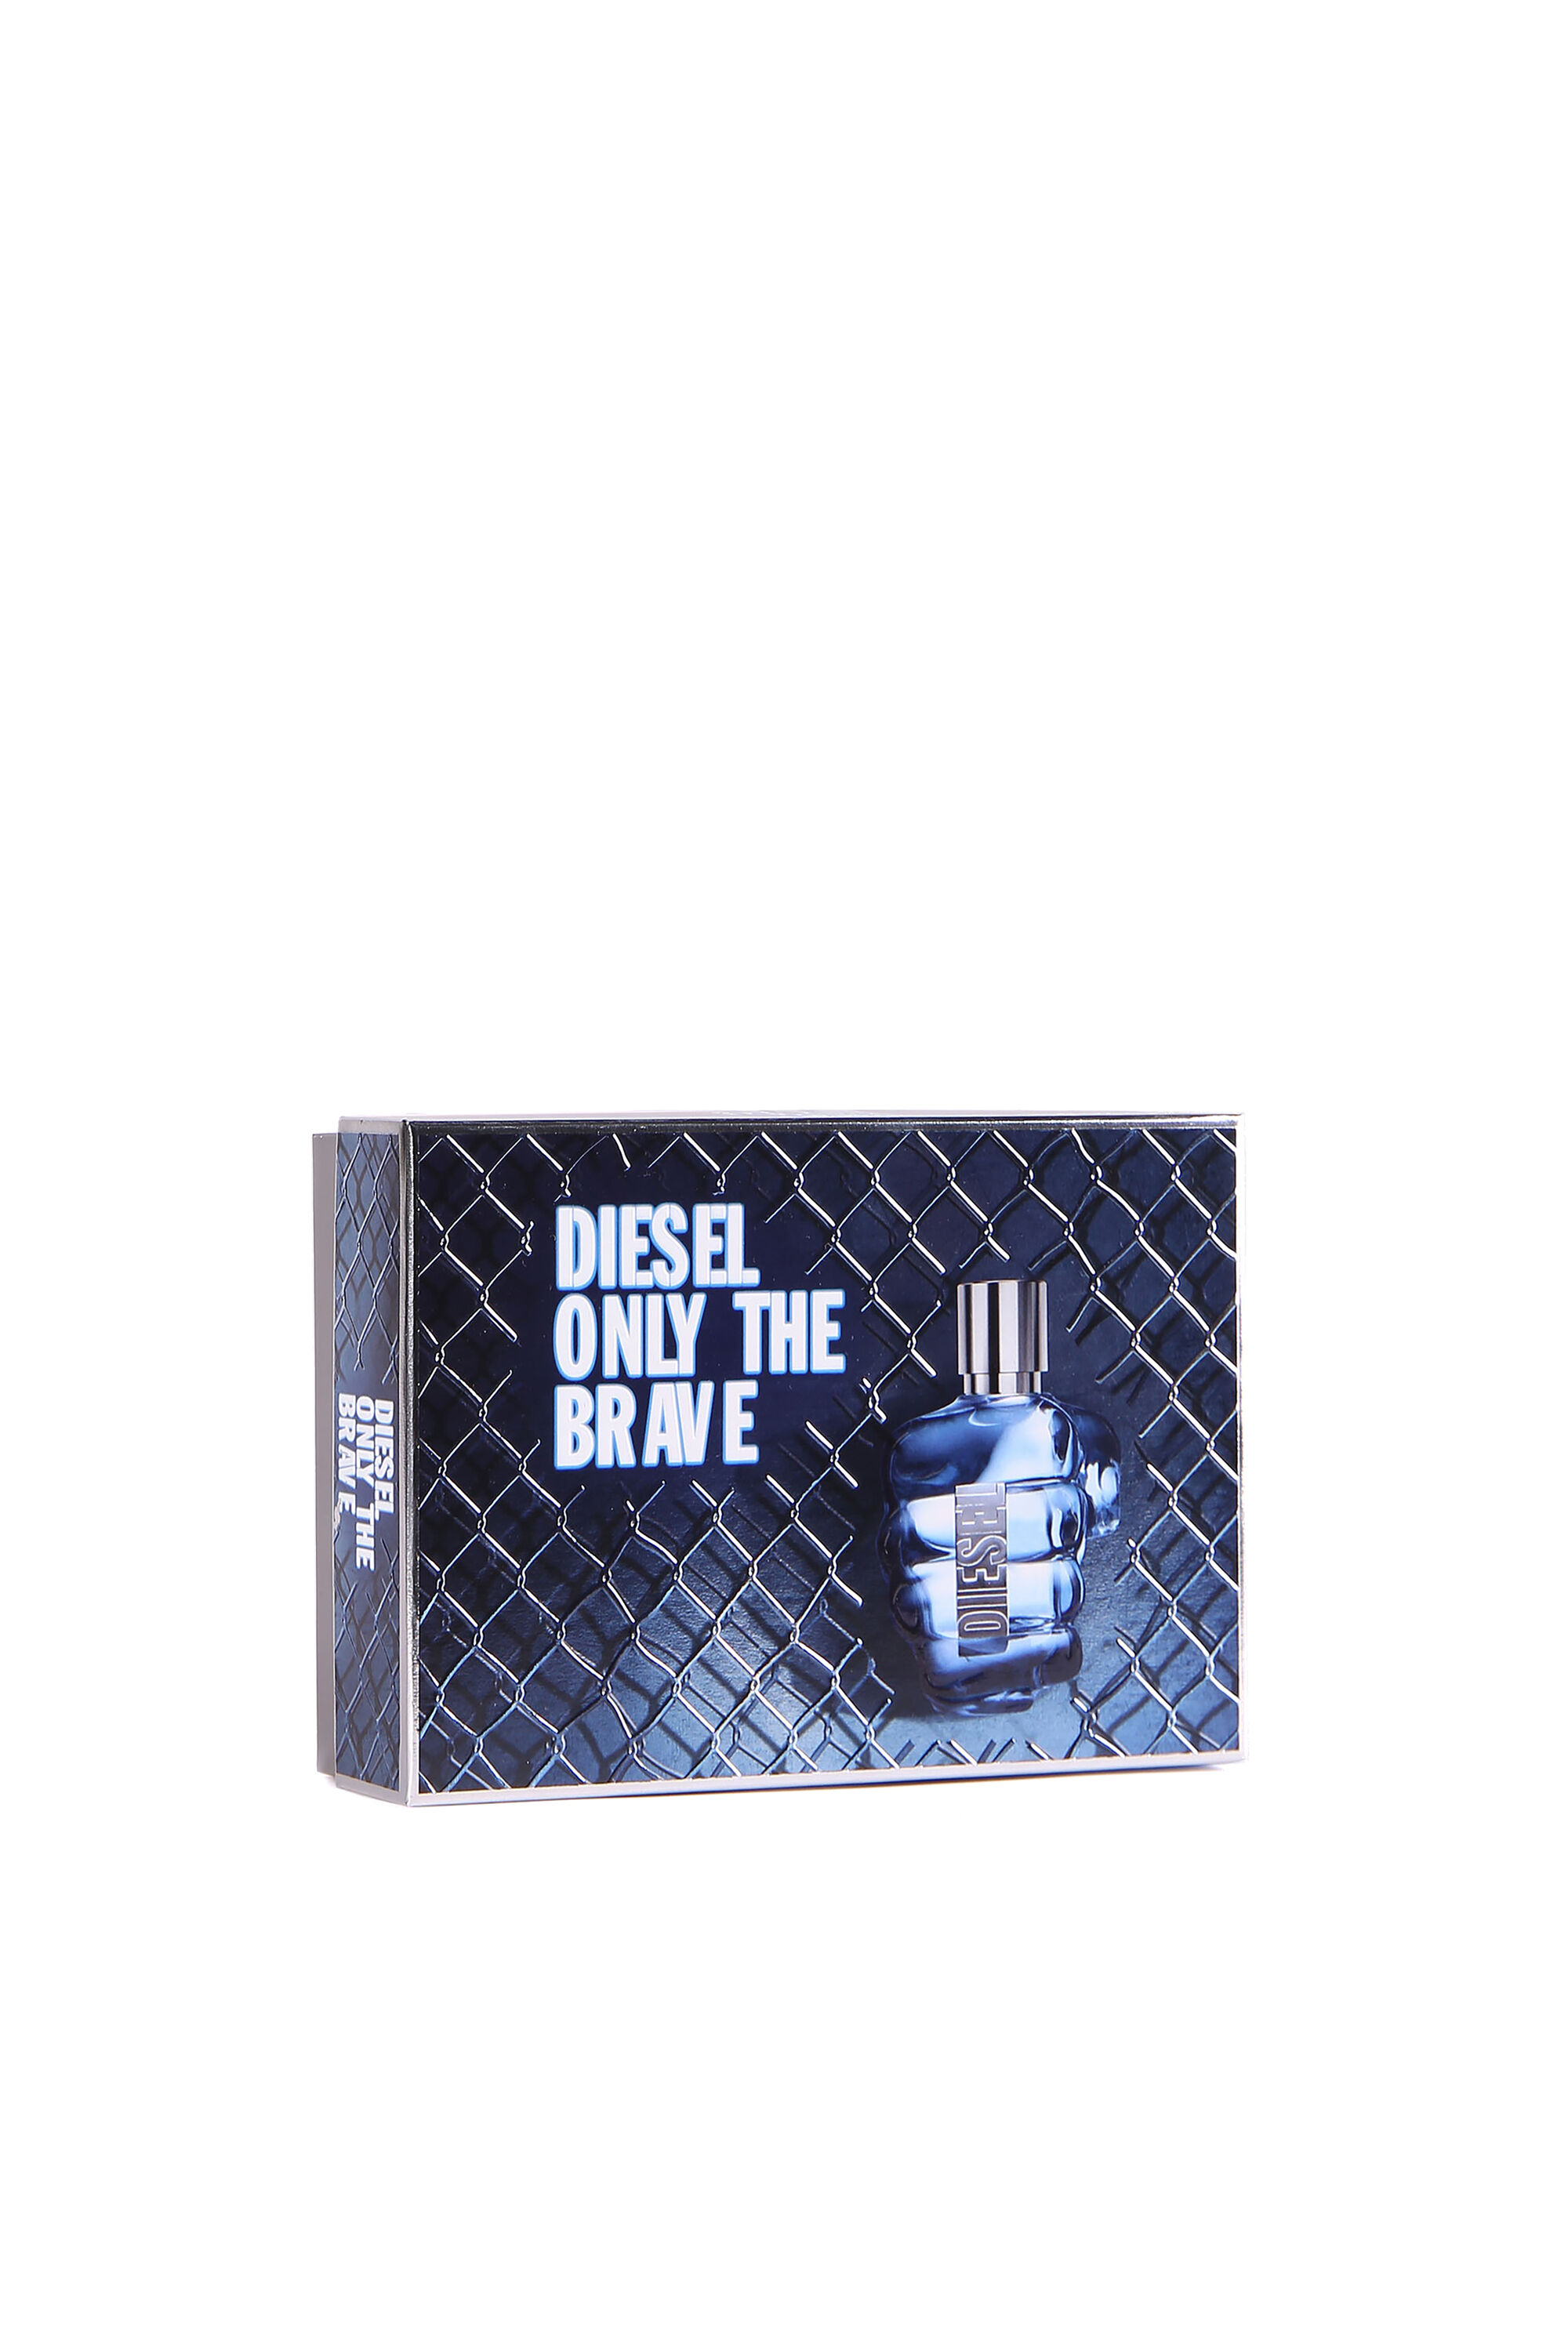 Diesel - ONLY THE BRAVE 35ML GIFT SET,  - Image 1